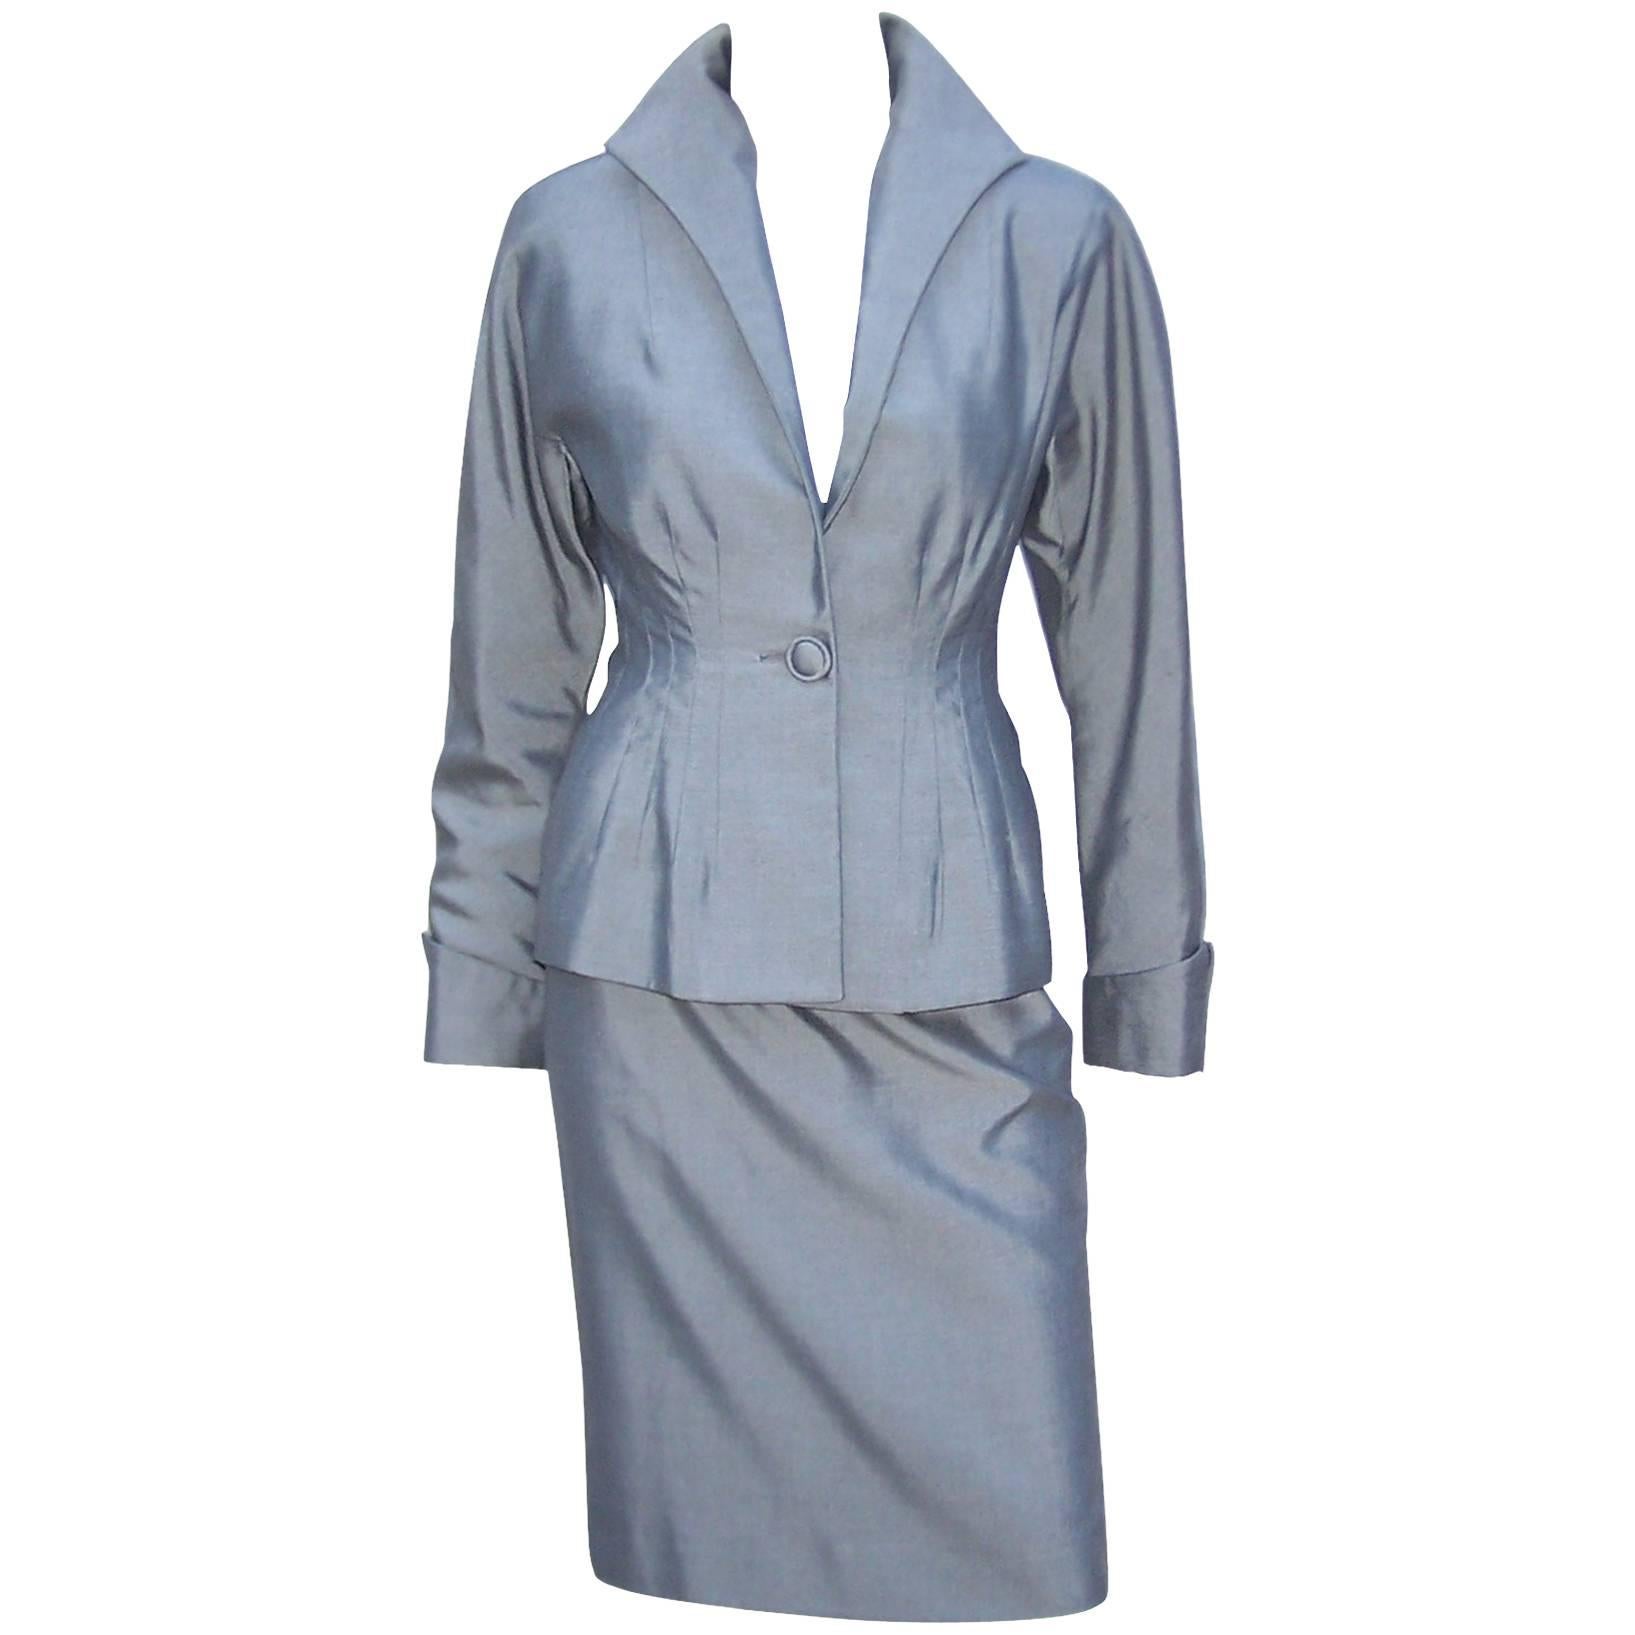 C.1980 Anne Klein Sharkskin Gray Skirt Suit With 1940's Inspiration